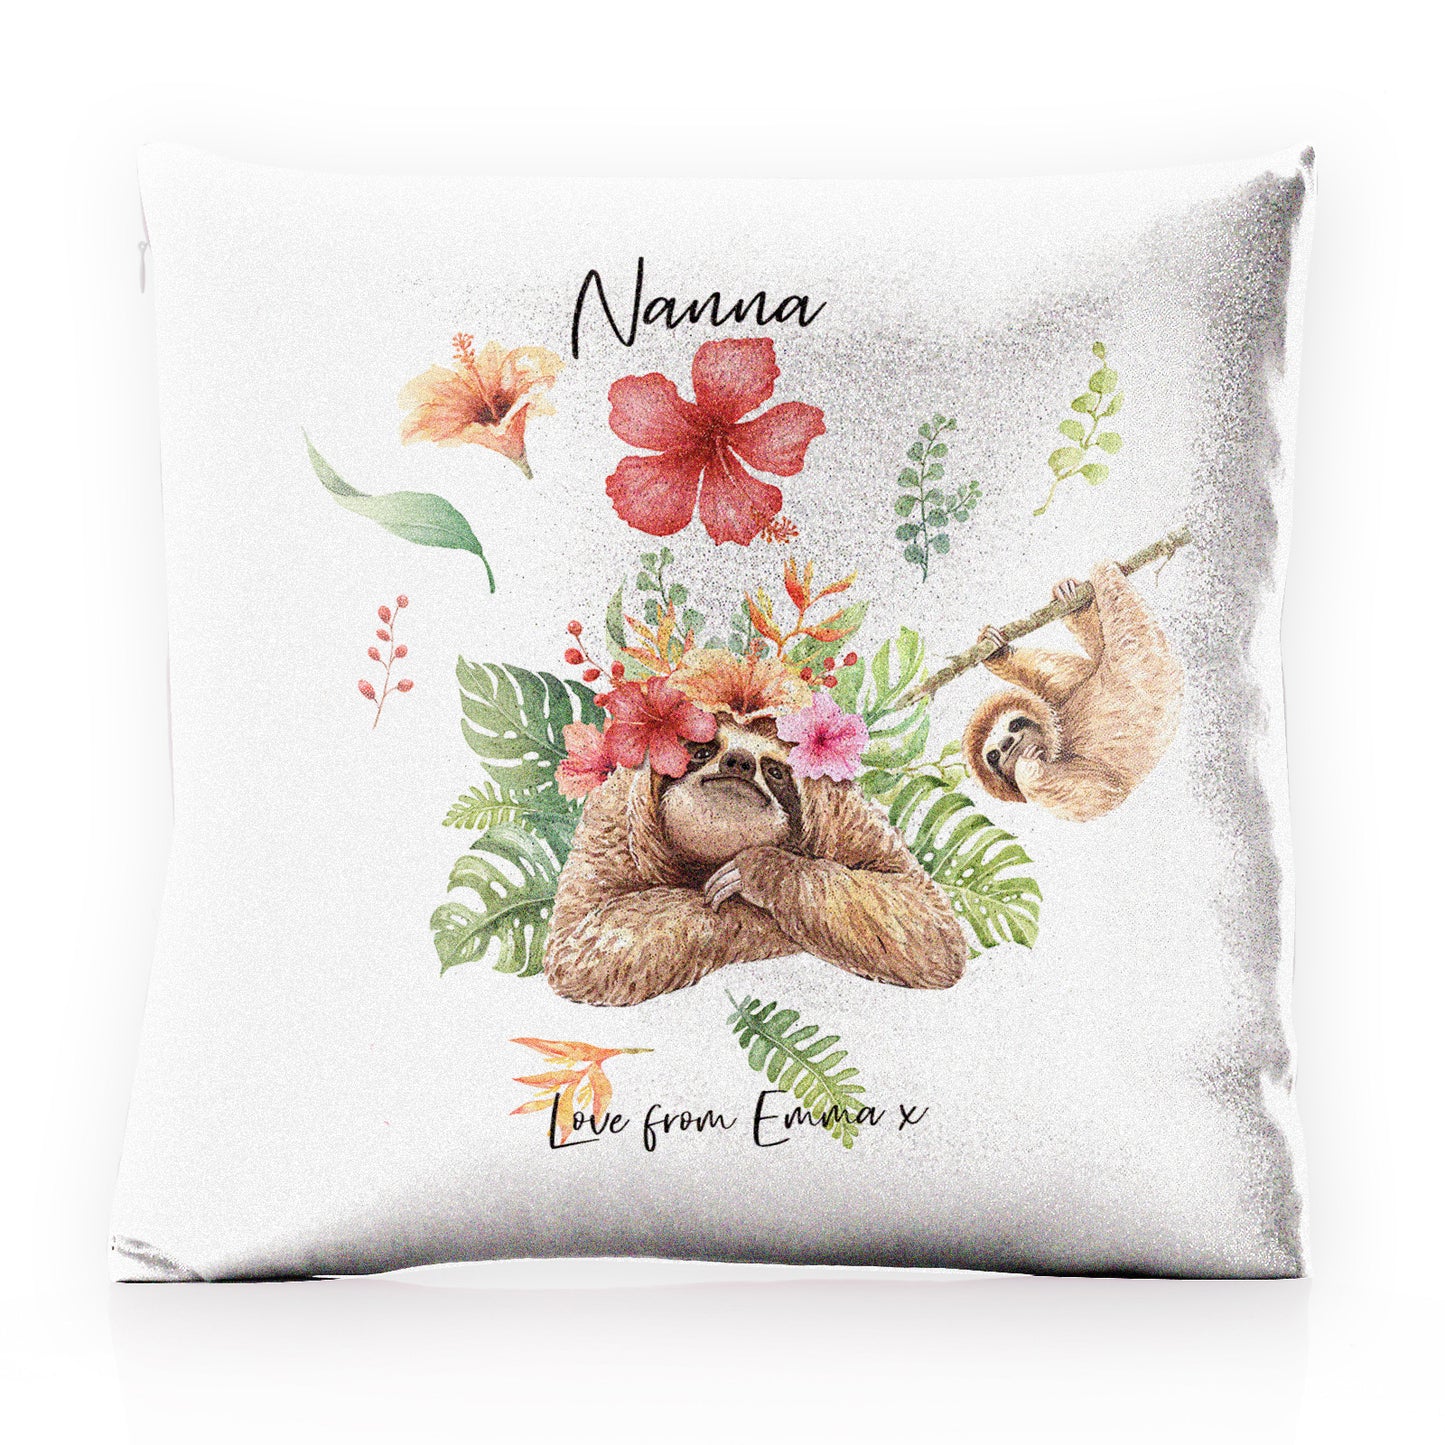 Personalised Glitter Cushion with Stylish Text and Floral Mum and Baby Sloths